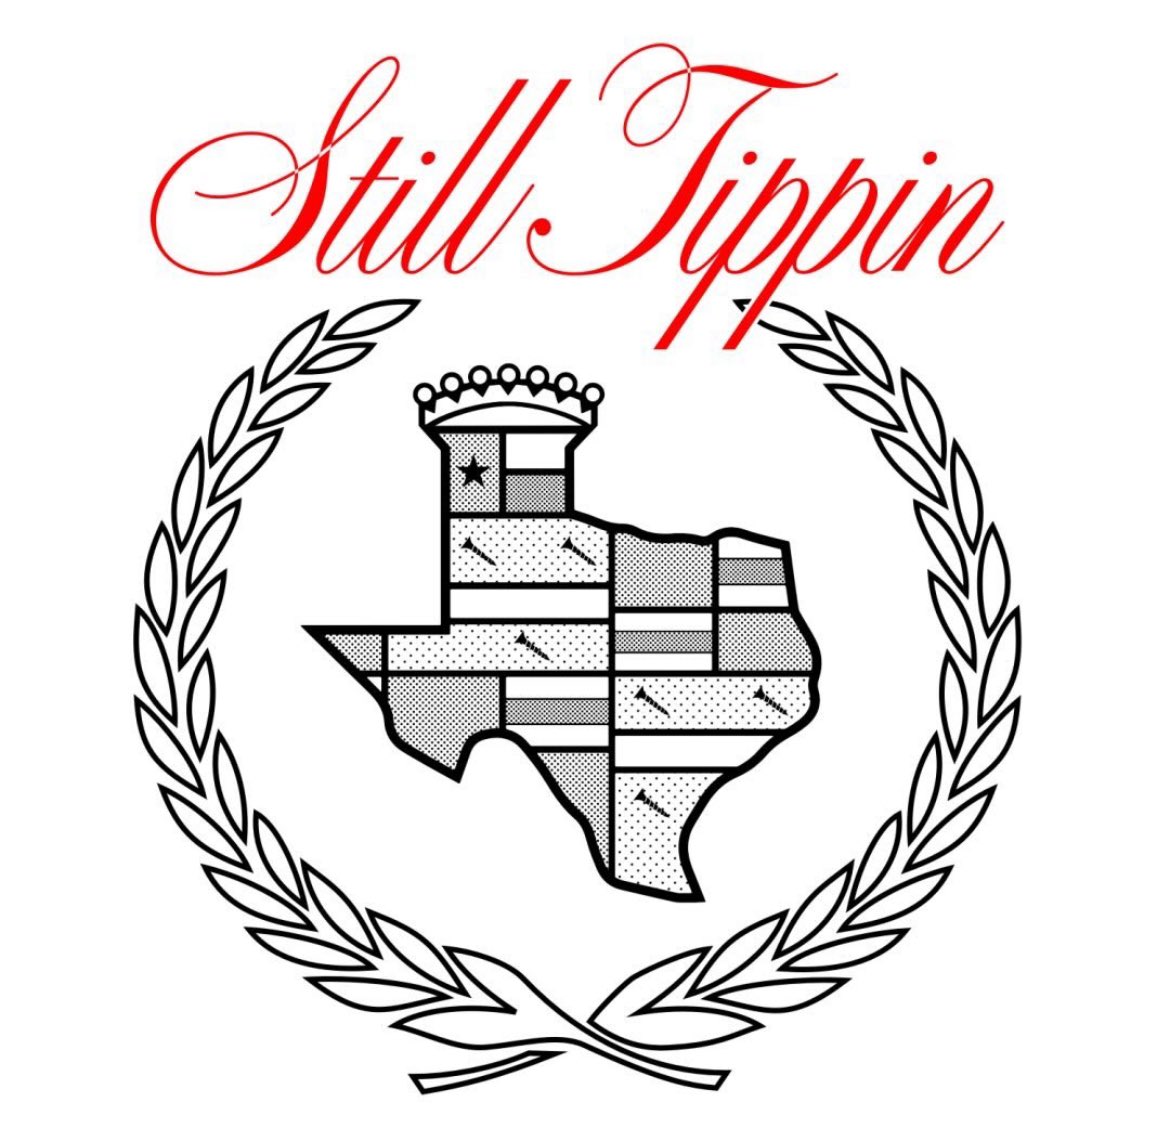 the “still tippin” collection presented by @DjDieselboy and myself is now available for purchase on it’s own site: stilltippin.co - also, the IG account is up and running. holler at it: instagram.com/wearestilltipp…